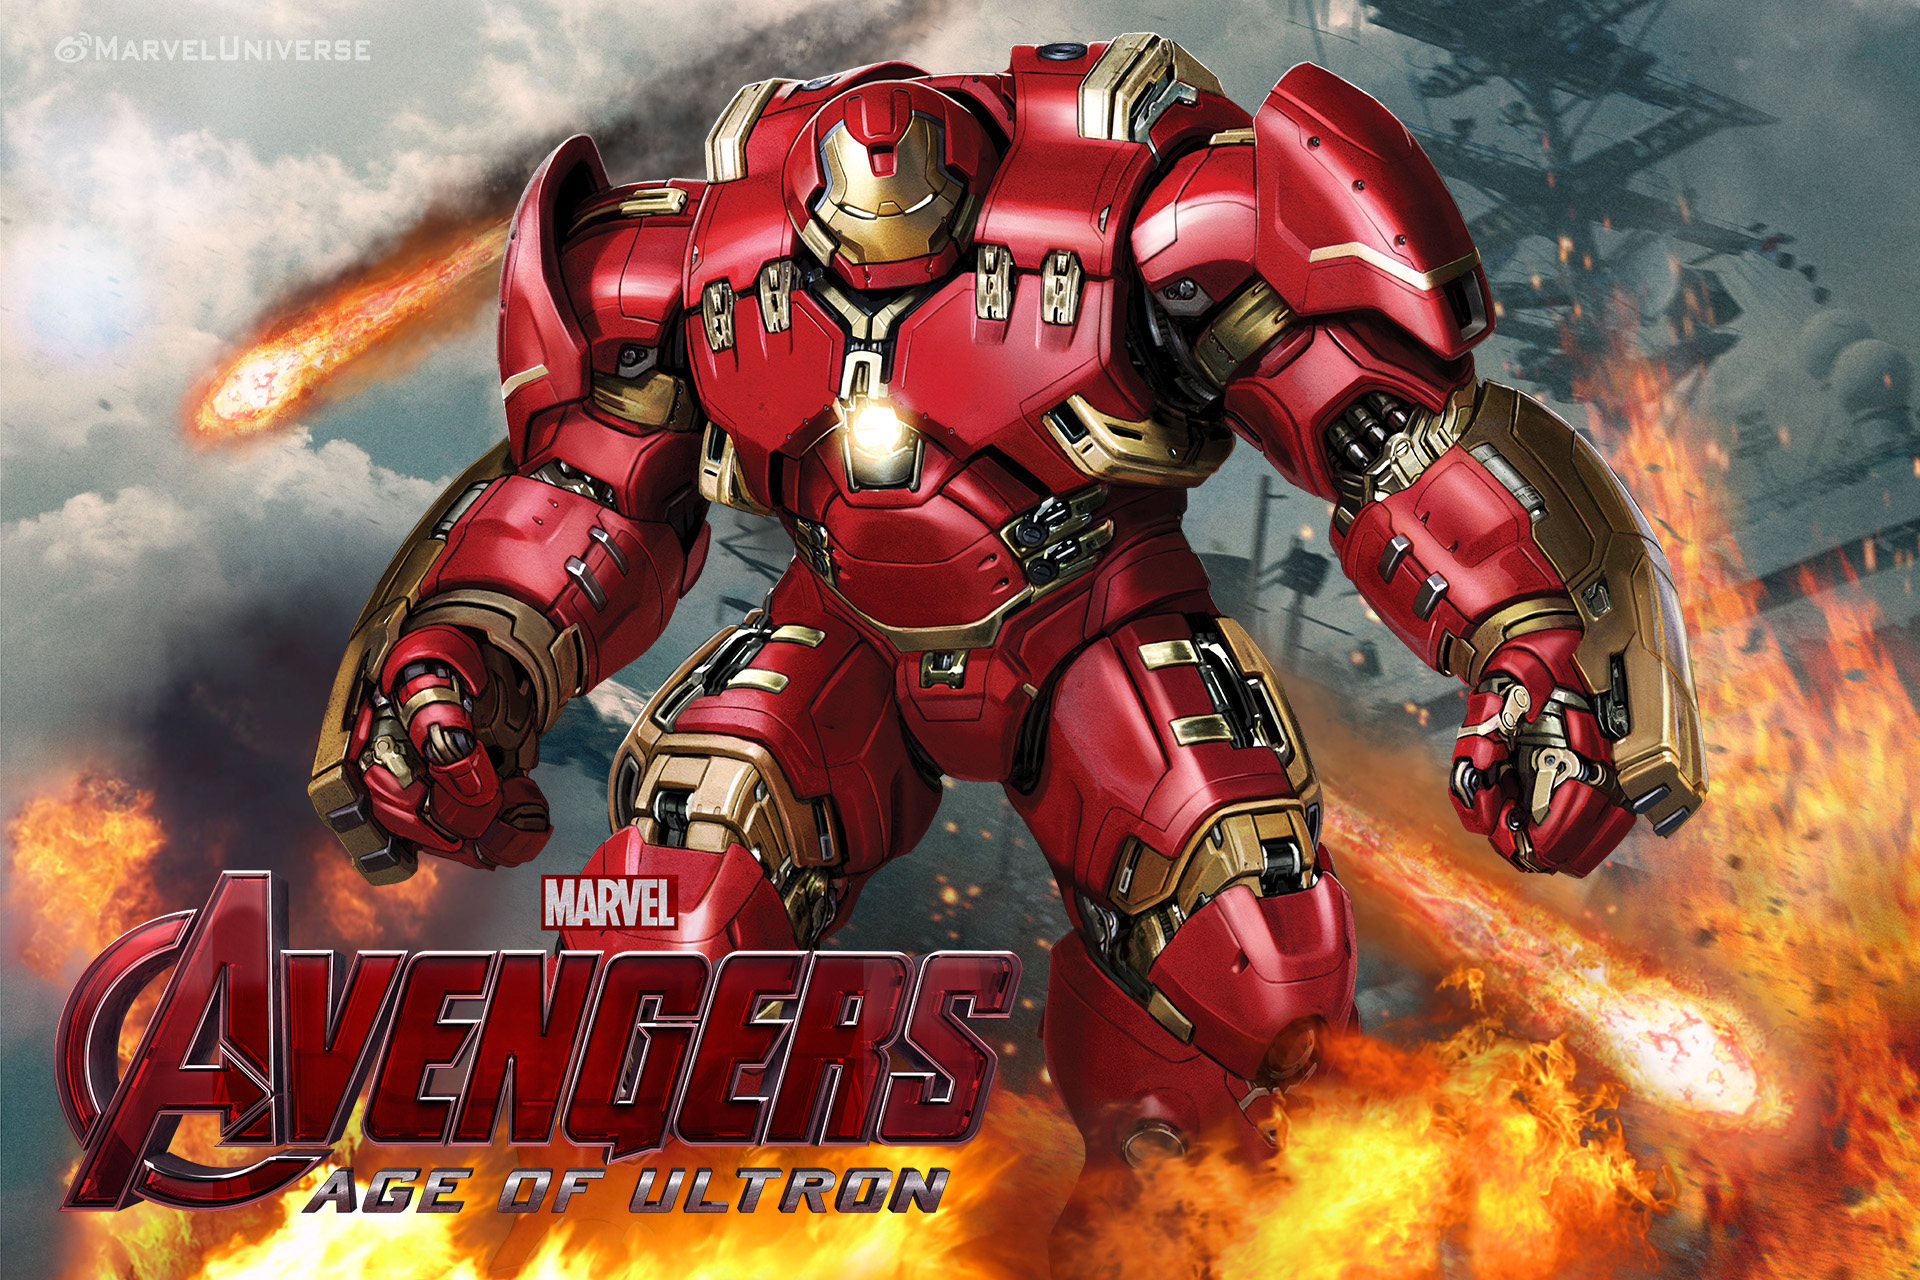 Avengers Age Of Ultron Iron Man Hulk Buster By Chenshijie9095 On